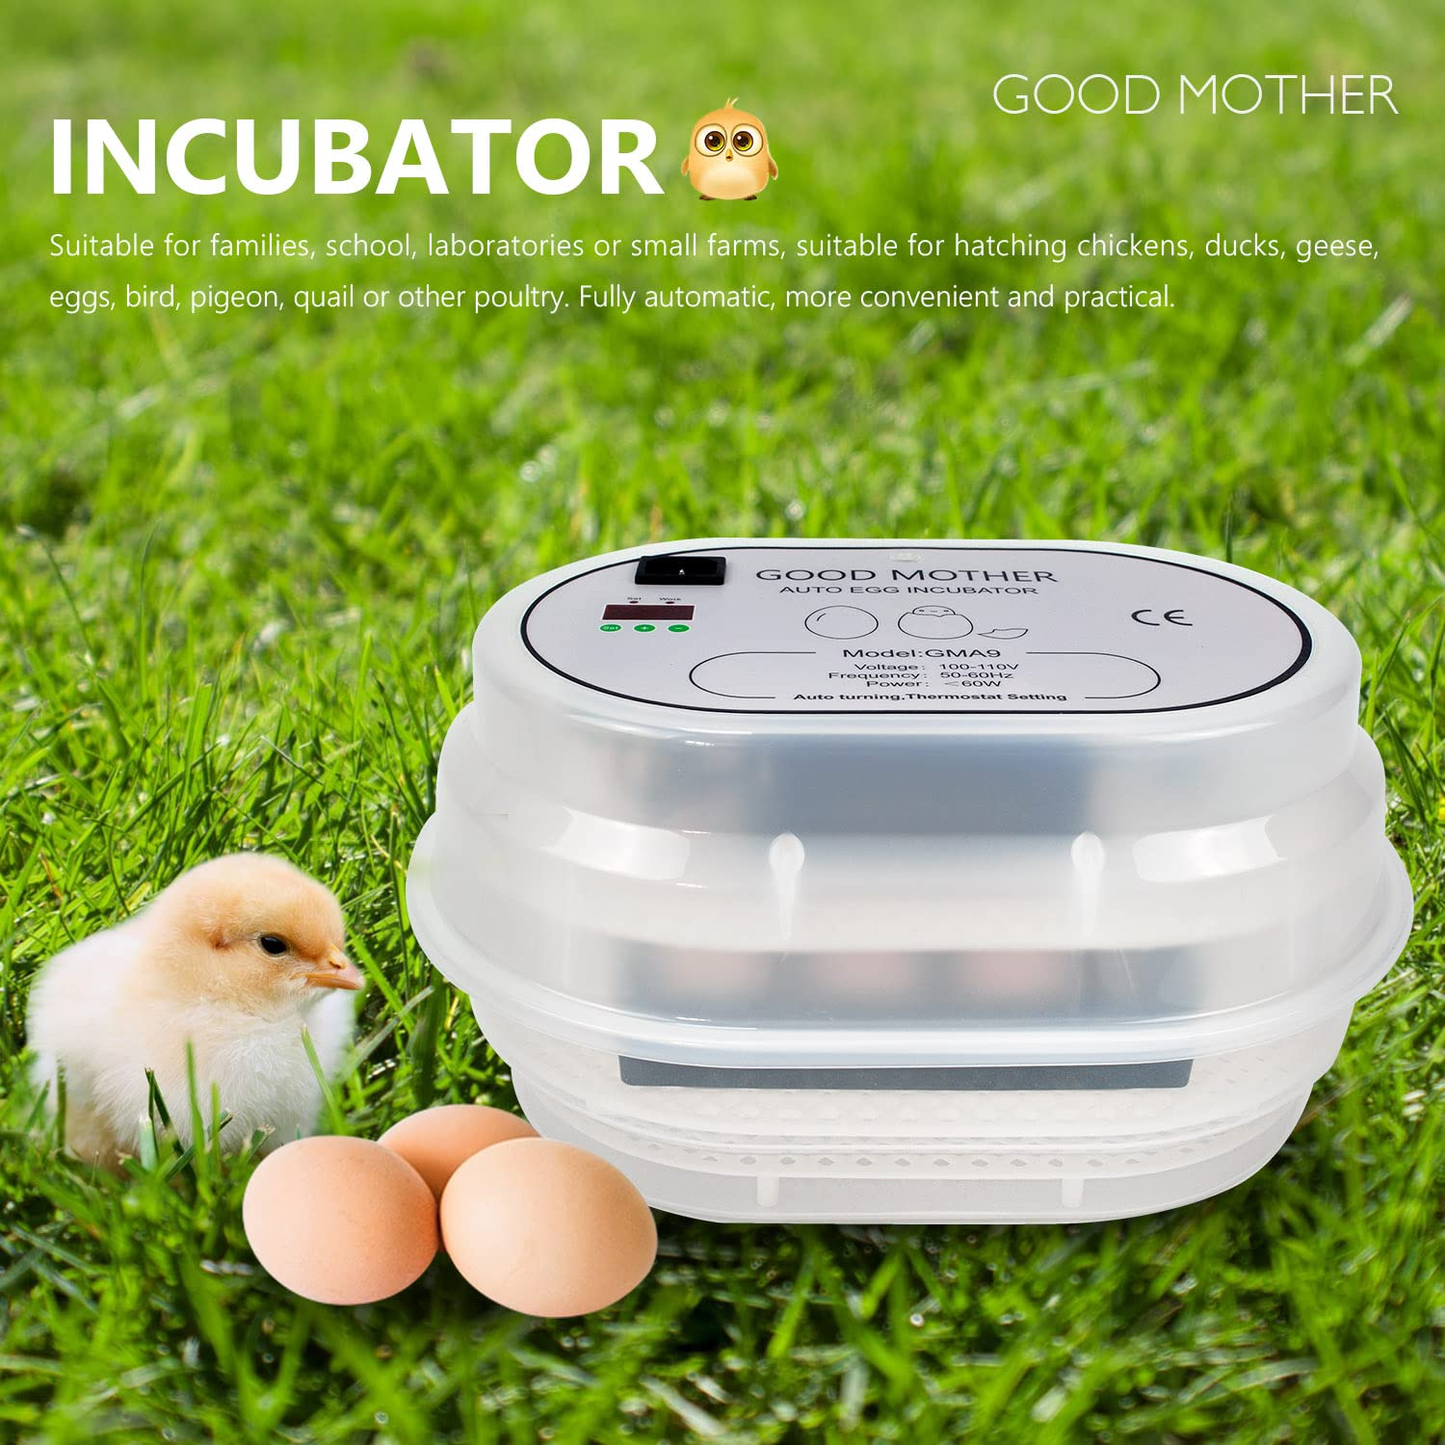 GOOD MOTHER Digital Fully Automatic Egg Incubator 9-12 Chicken Eggs [Fahrenheit] Poultry Hatcher for Chickens Ducks Goose Birds Quail Eggs